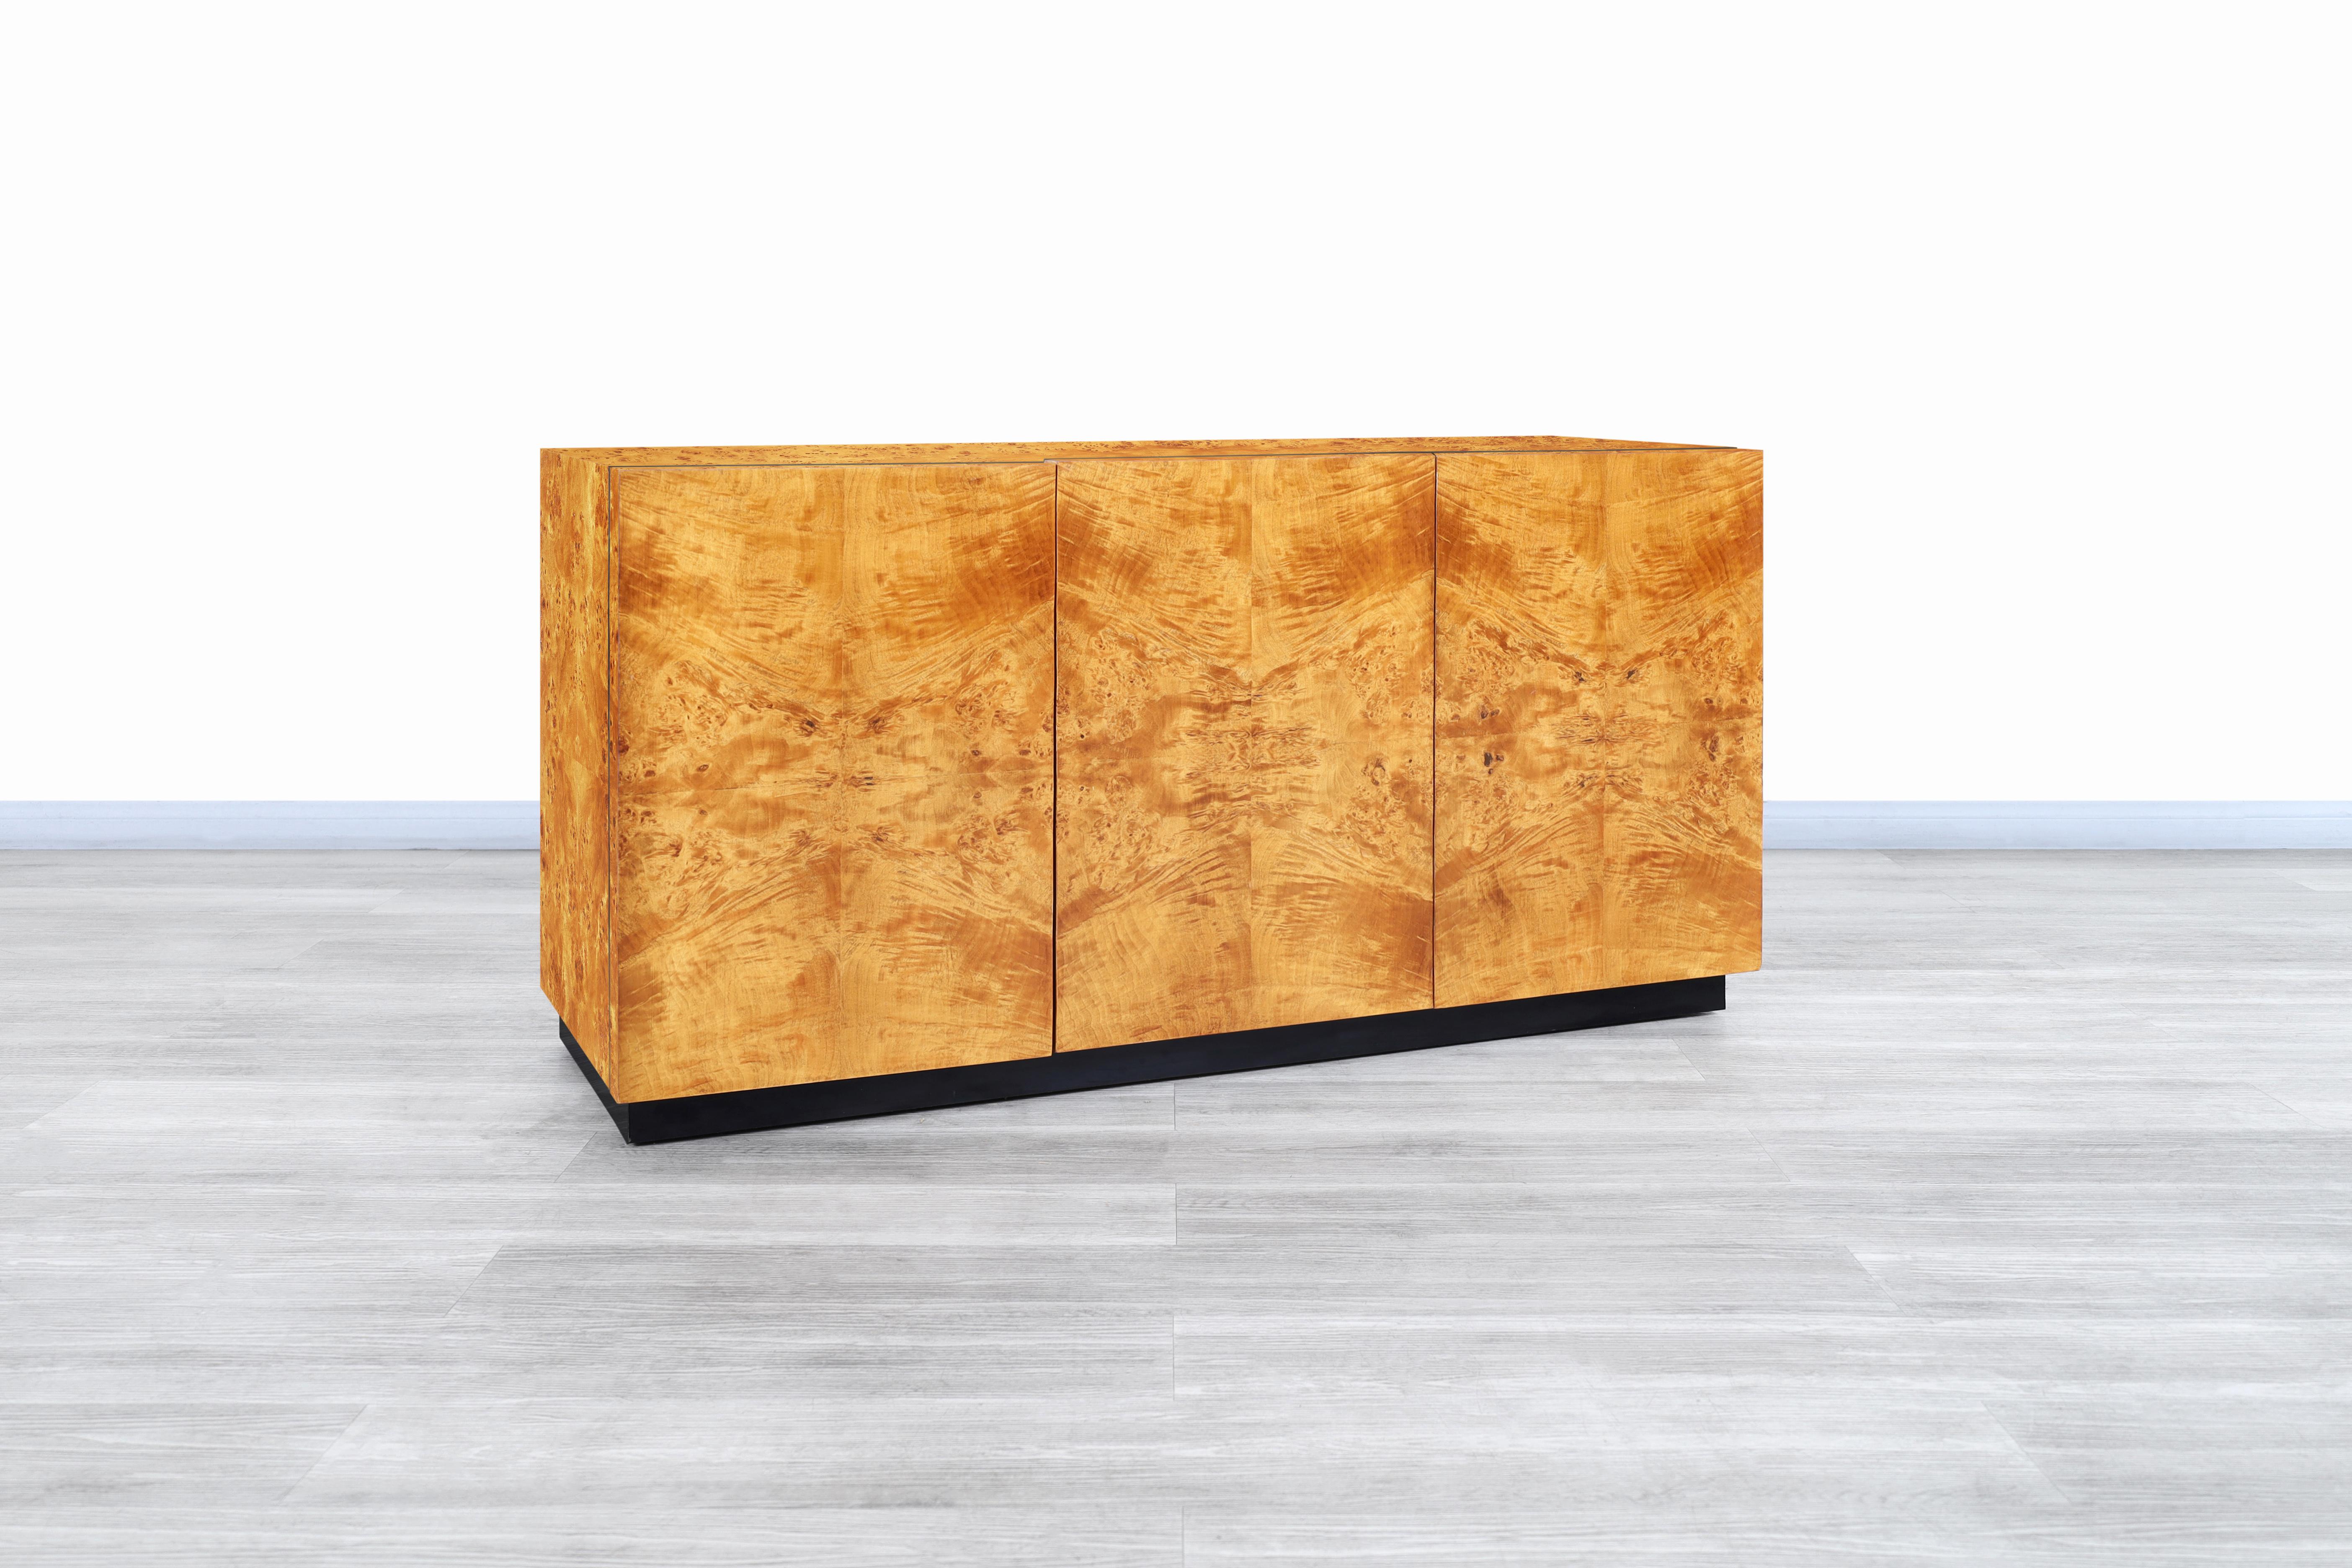 Stunning midcentury burl wood credenza designed by Arthur Umanoff for Dillingham in the United States, circa 1970s. This credenza has a Minimalist but highly functional design and is complemented by the suitable materials used for its construction.